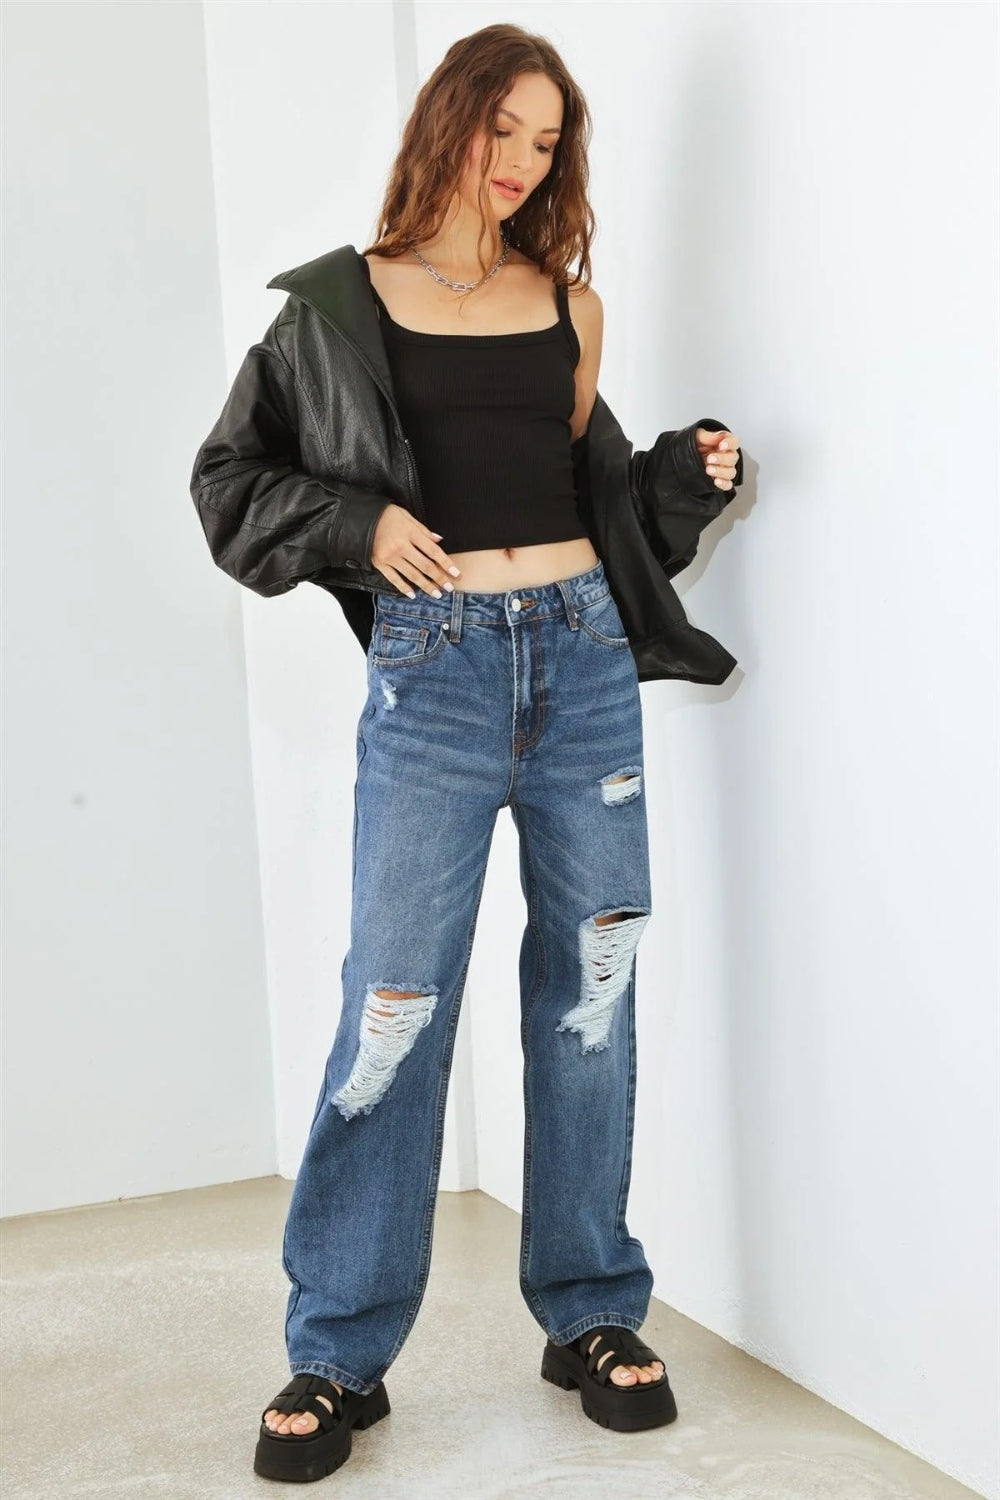 HAMMER COLLECTION Distressed High Waist Jeans - Tigbuls Variety Fashion